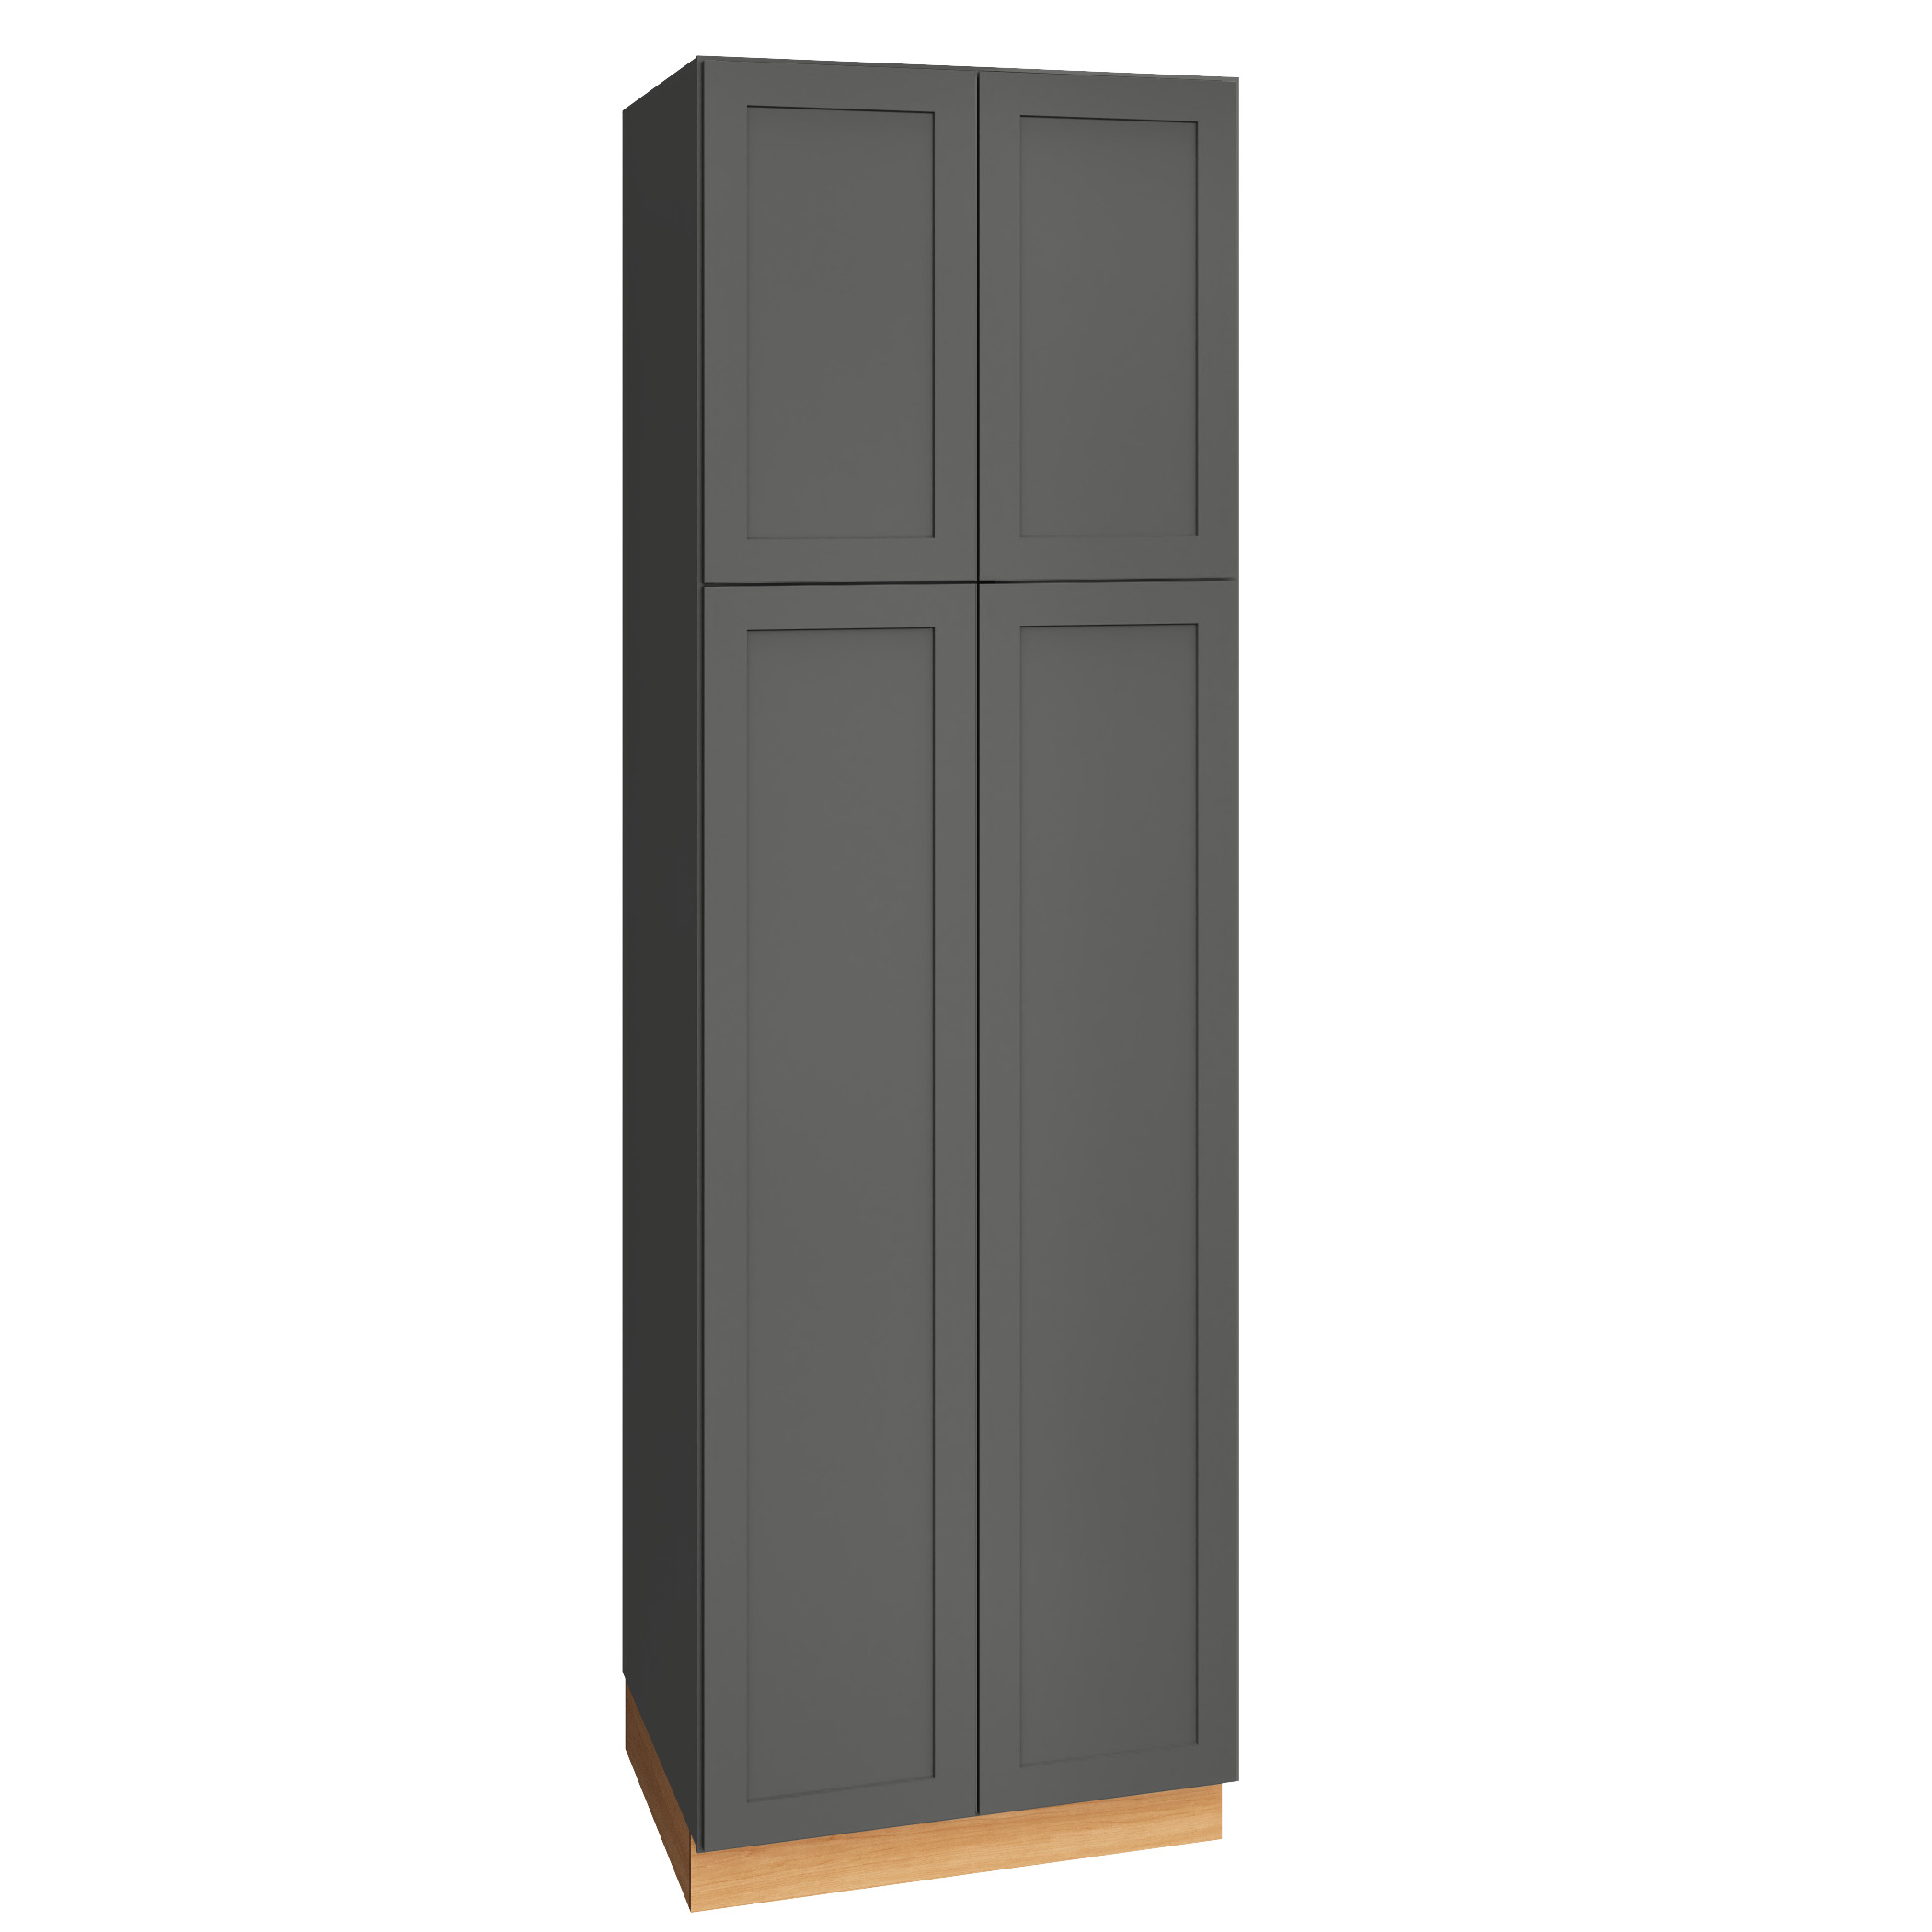 Utility Cabinet Width With Double Doors in Graphite